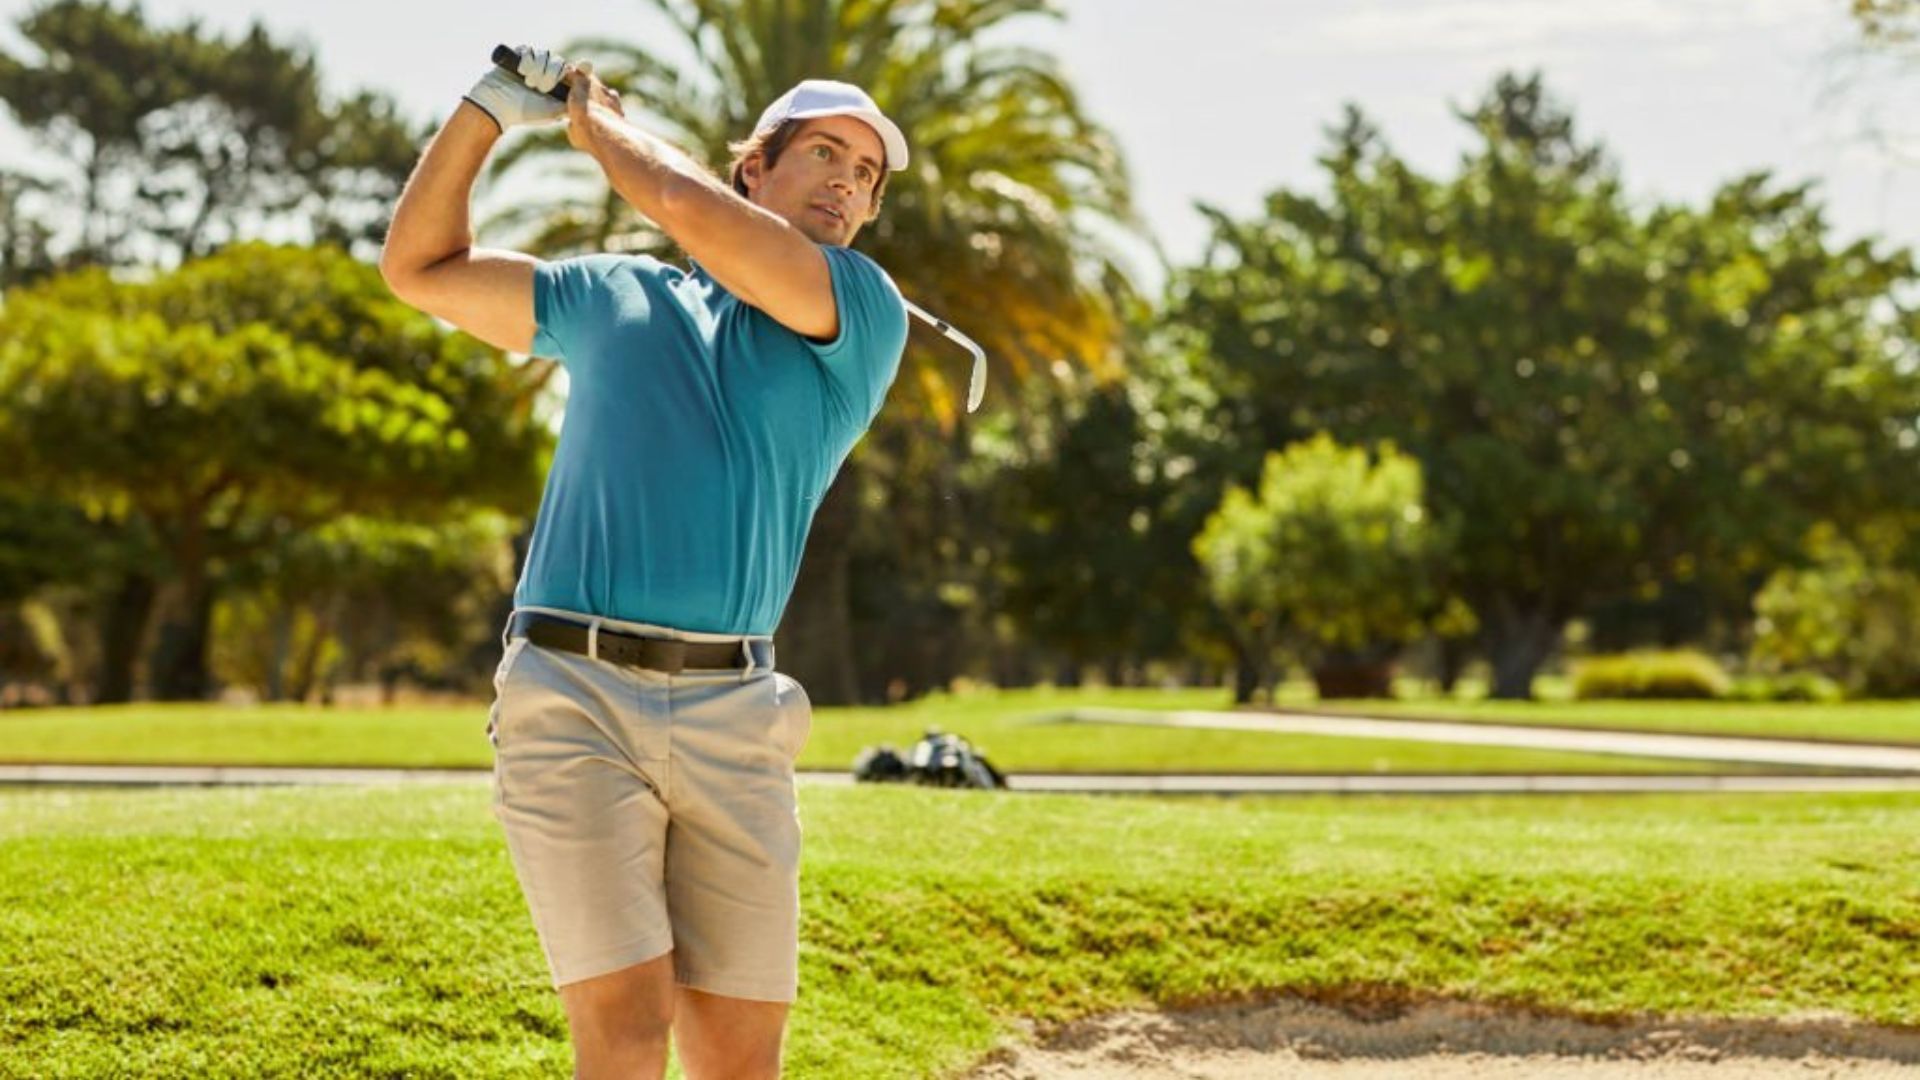 How to Get a Golfer's Body The Workout